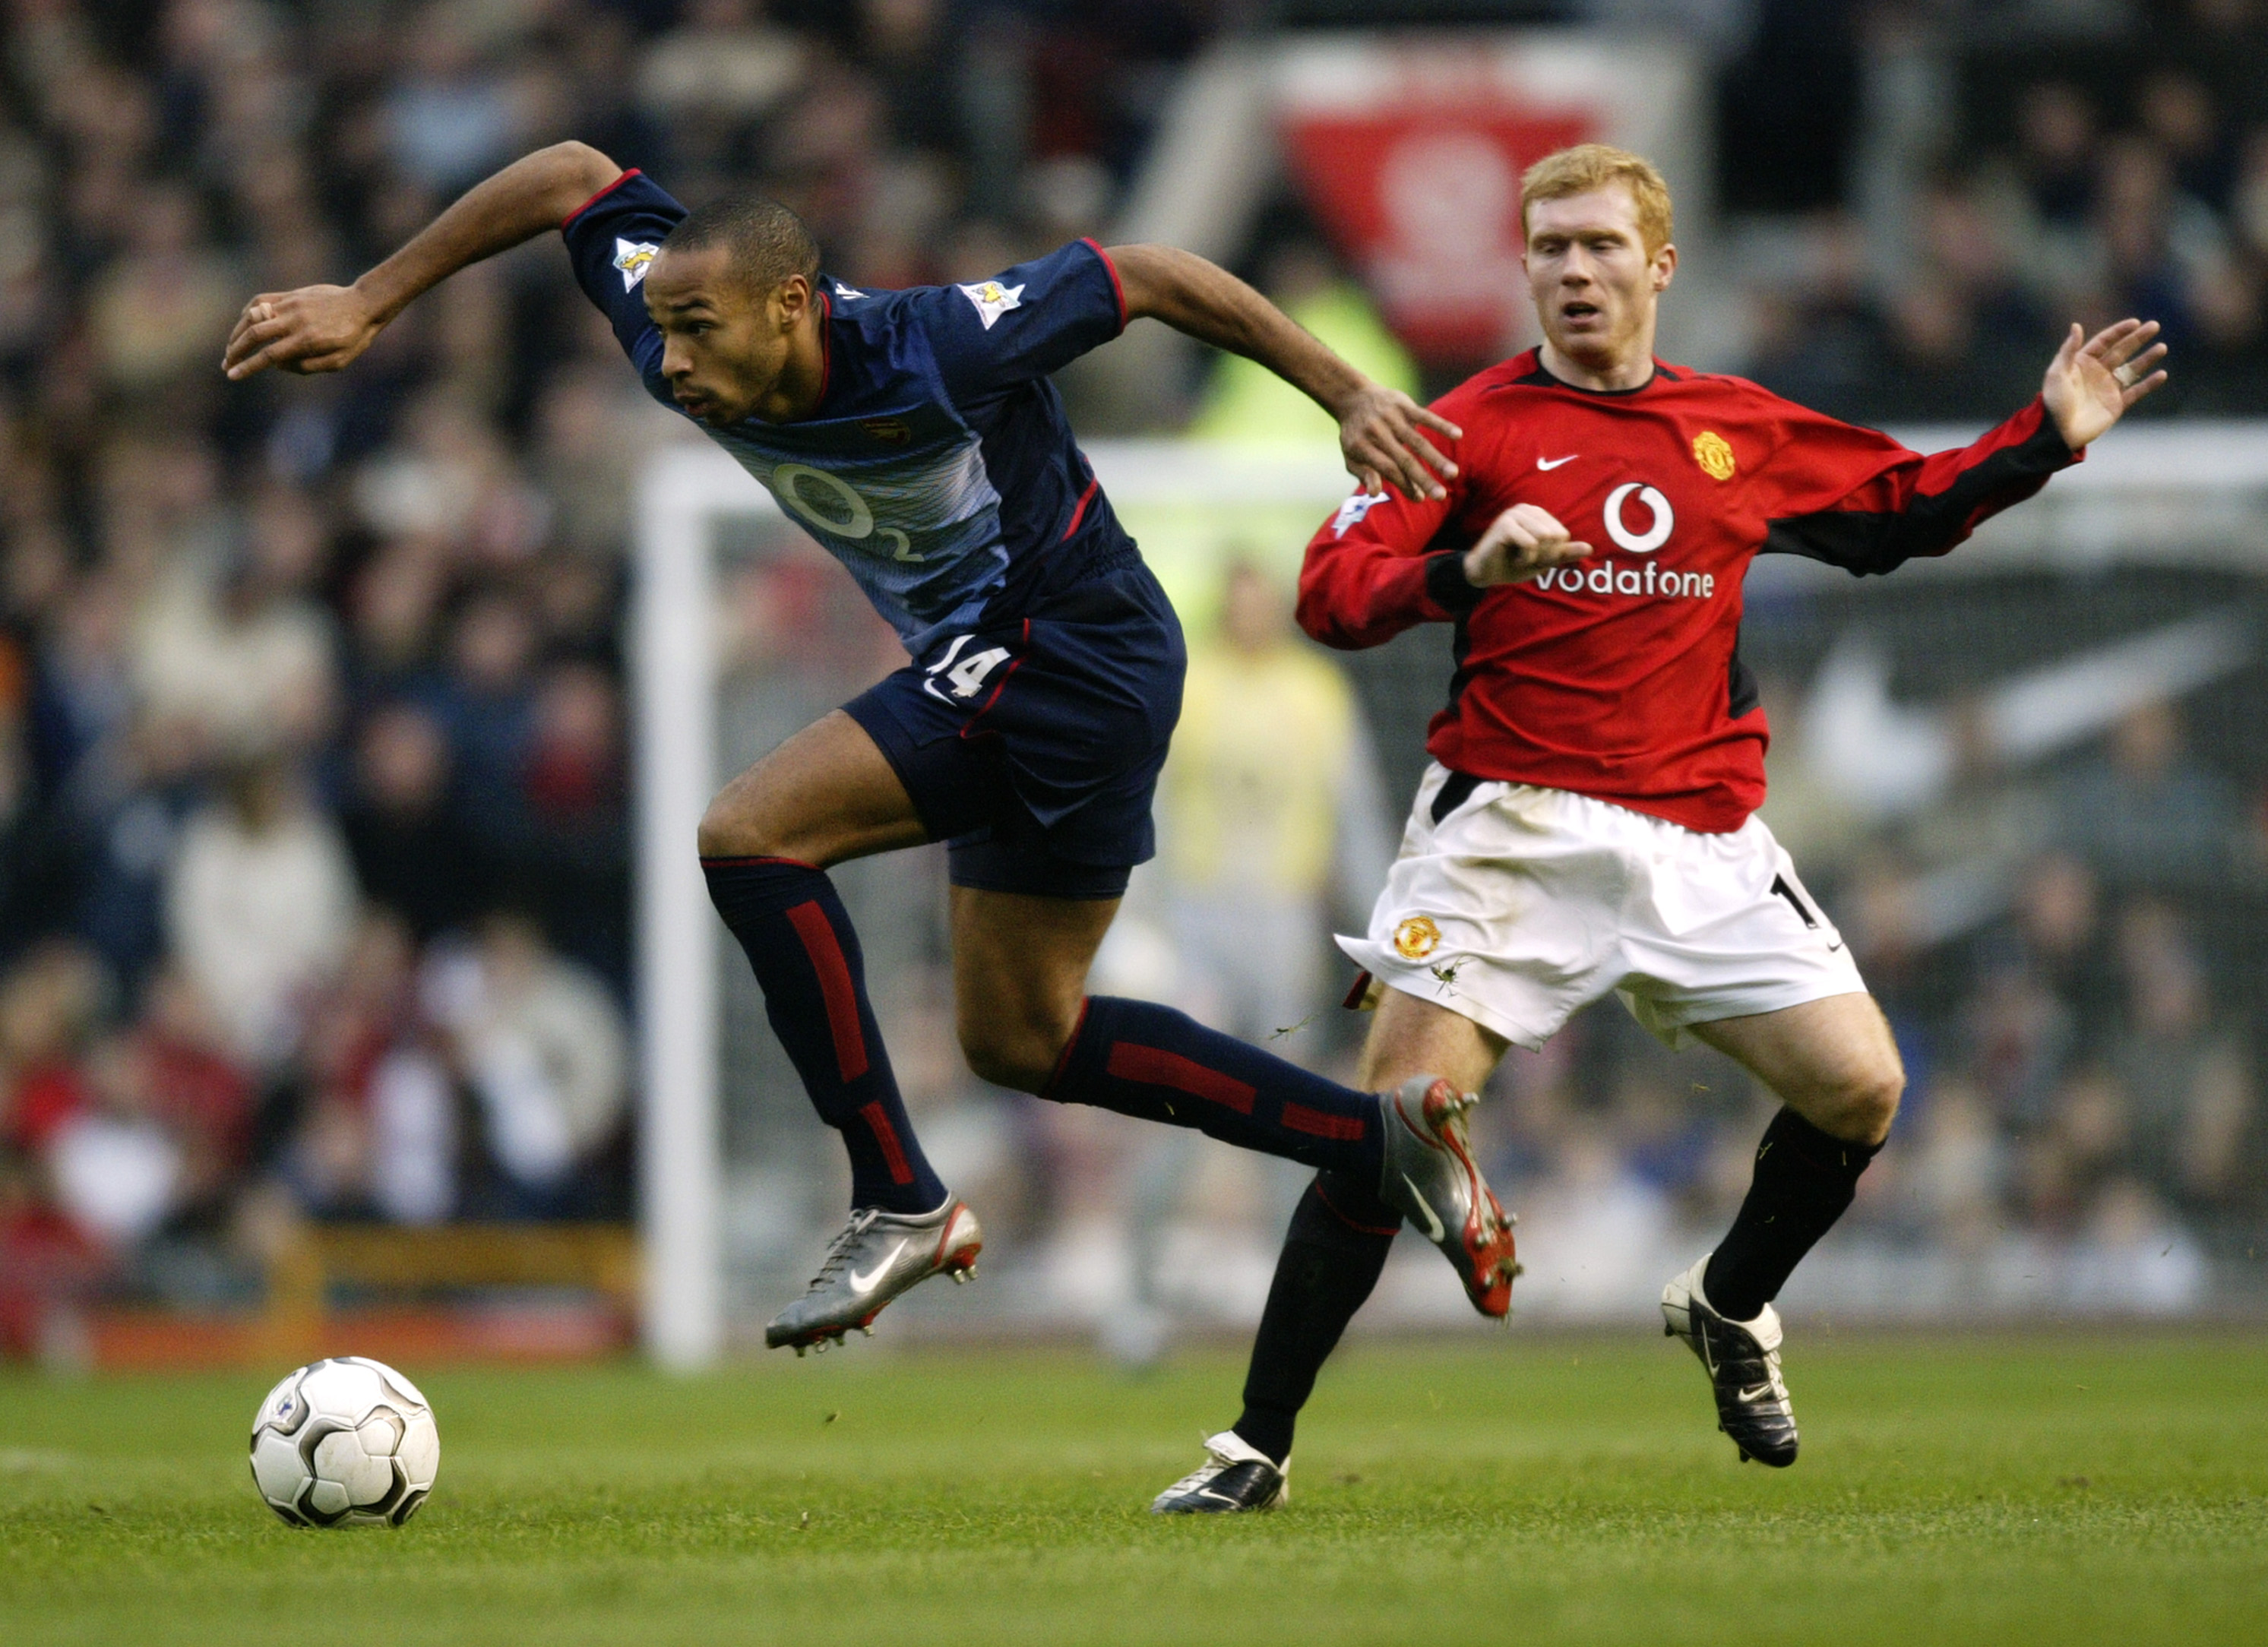 MANCHESTER - DECEMBER 7:  Paul Scholes of Man Utd clashes with Thierry Henry of Arsenal during the Manchester United v Arsenal FA Barclaycard Premiership match at Old Trafford on December 7, 2002 in Manchester, England. (Photo by Alex Livesey/Getty Images